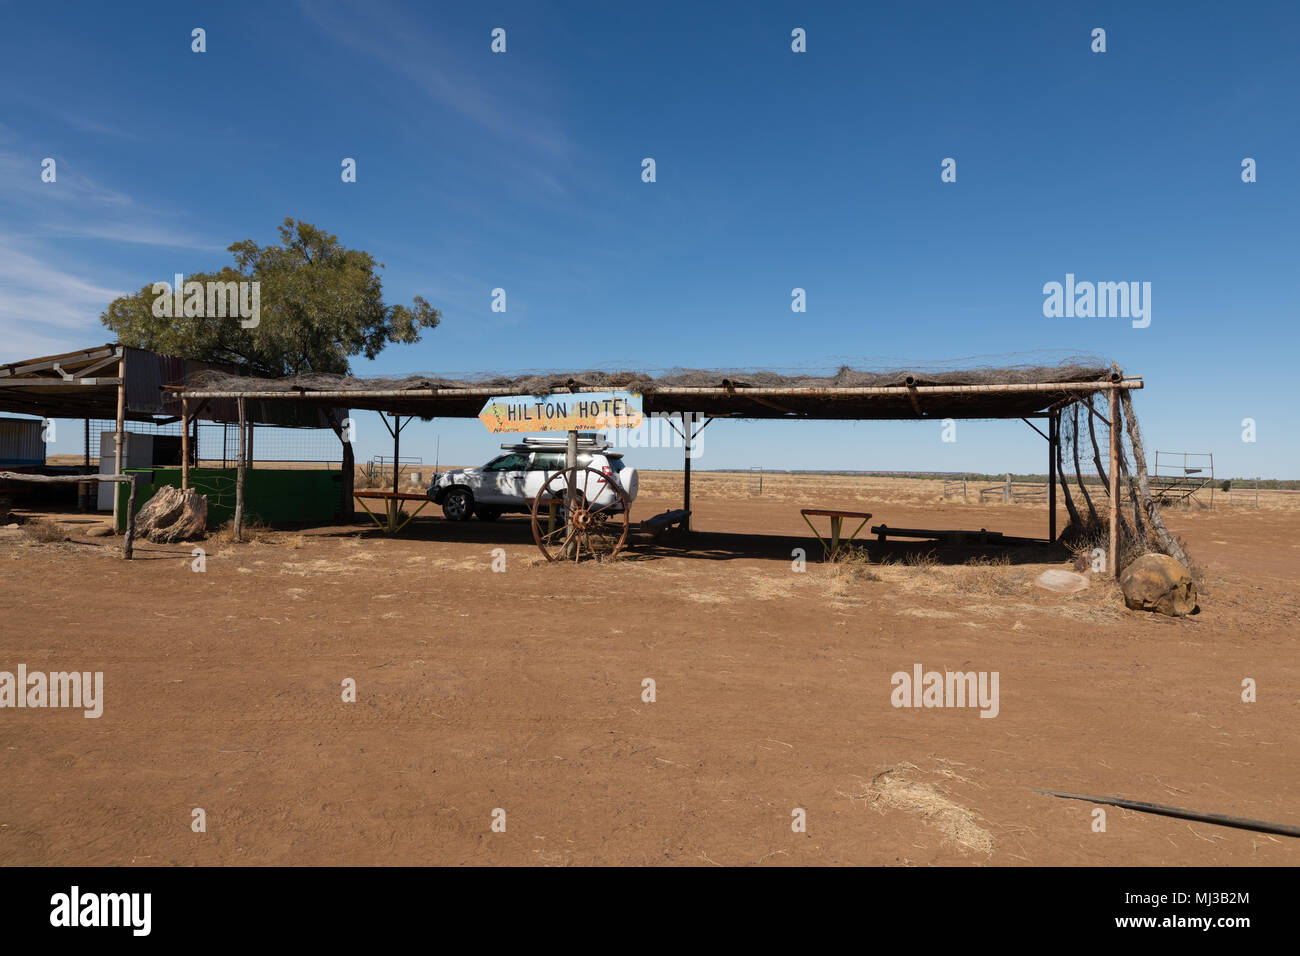 The bare and desolate free campground opposite the Middleton Hotel in outback central Australia. Stock Photo